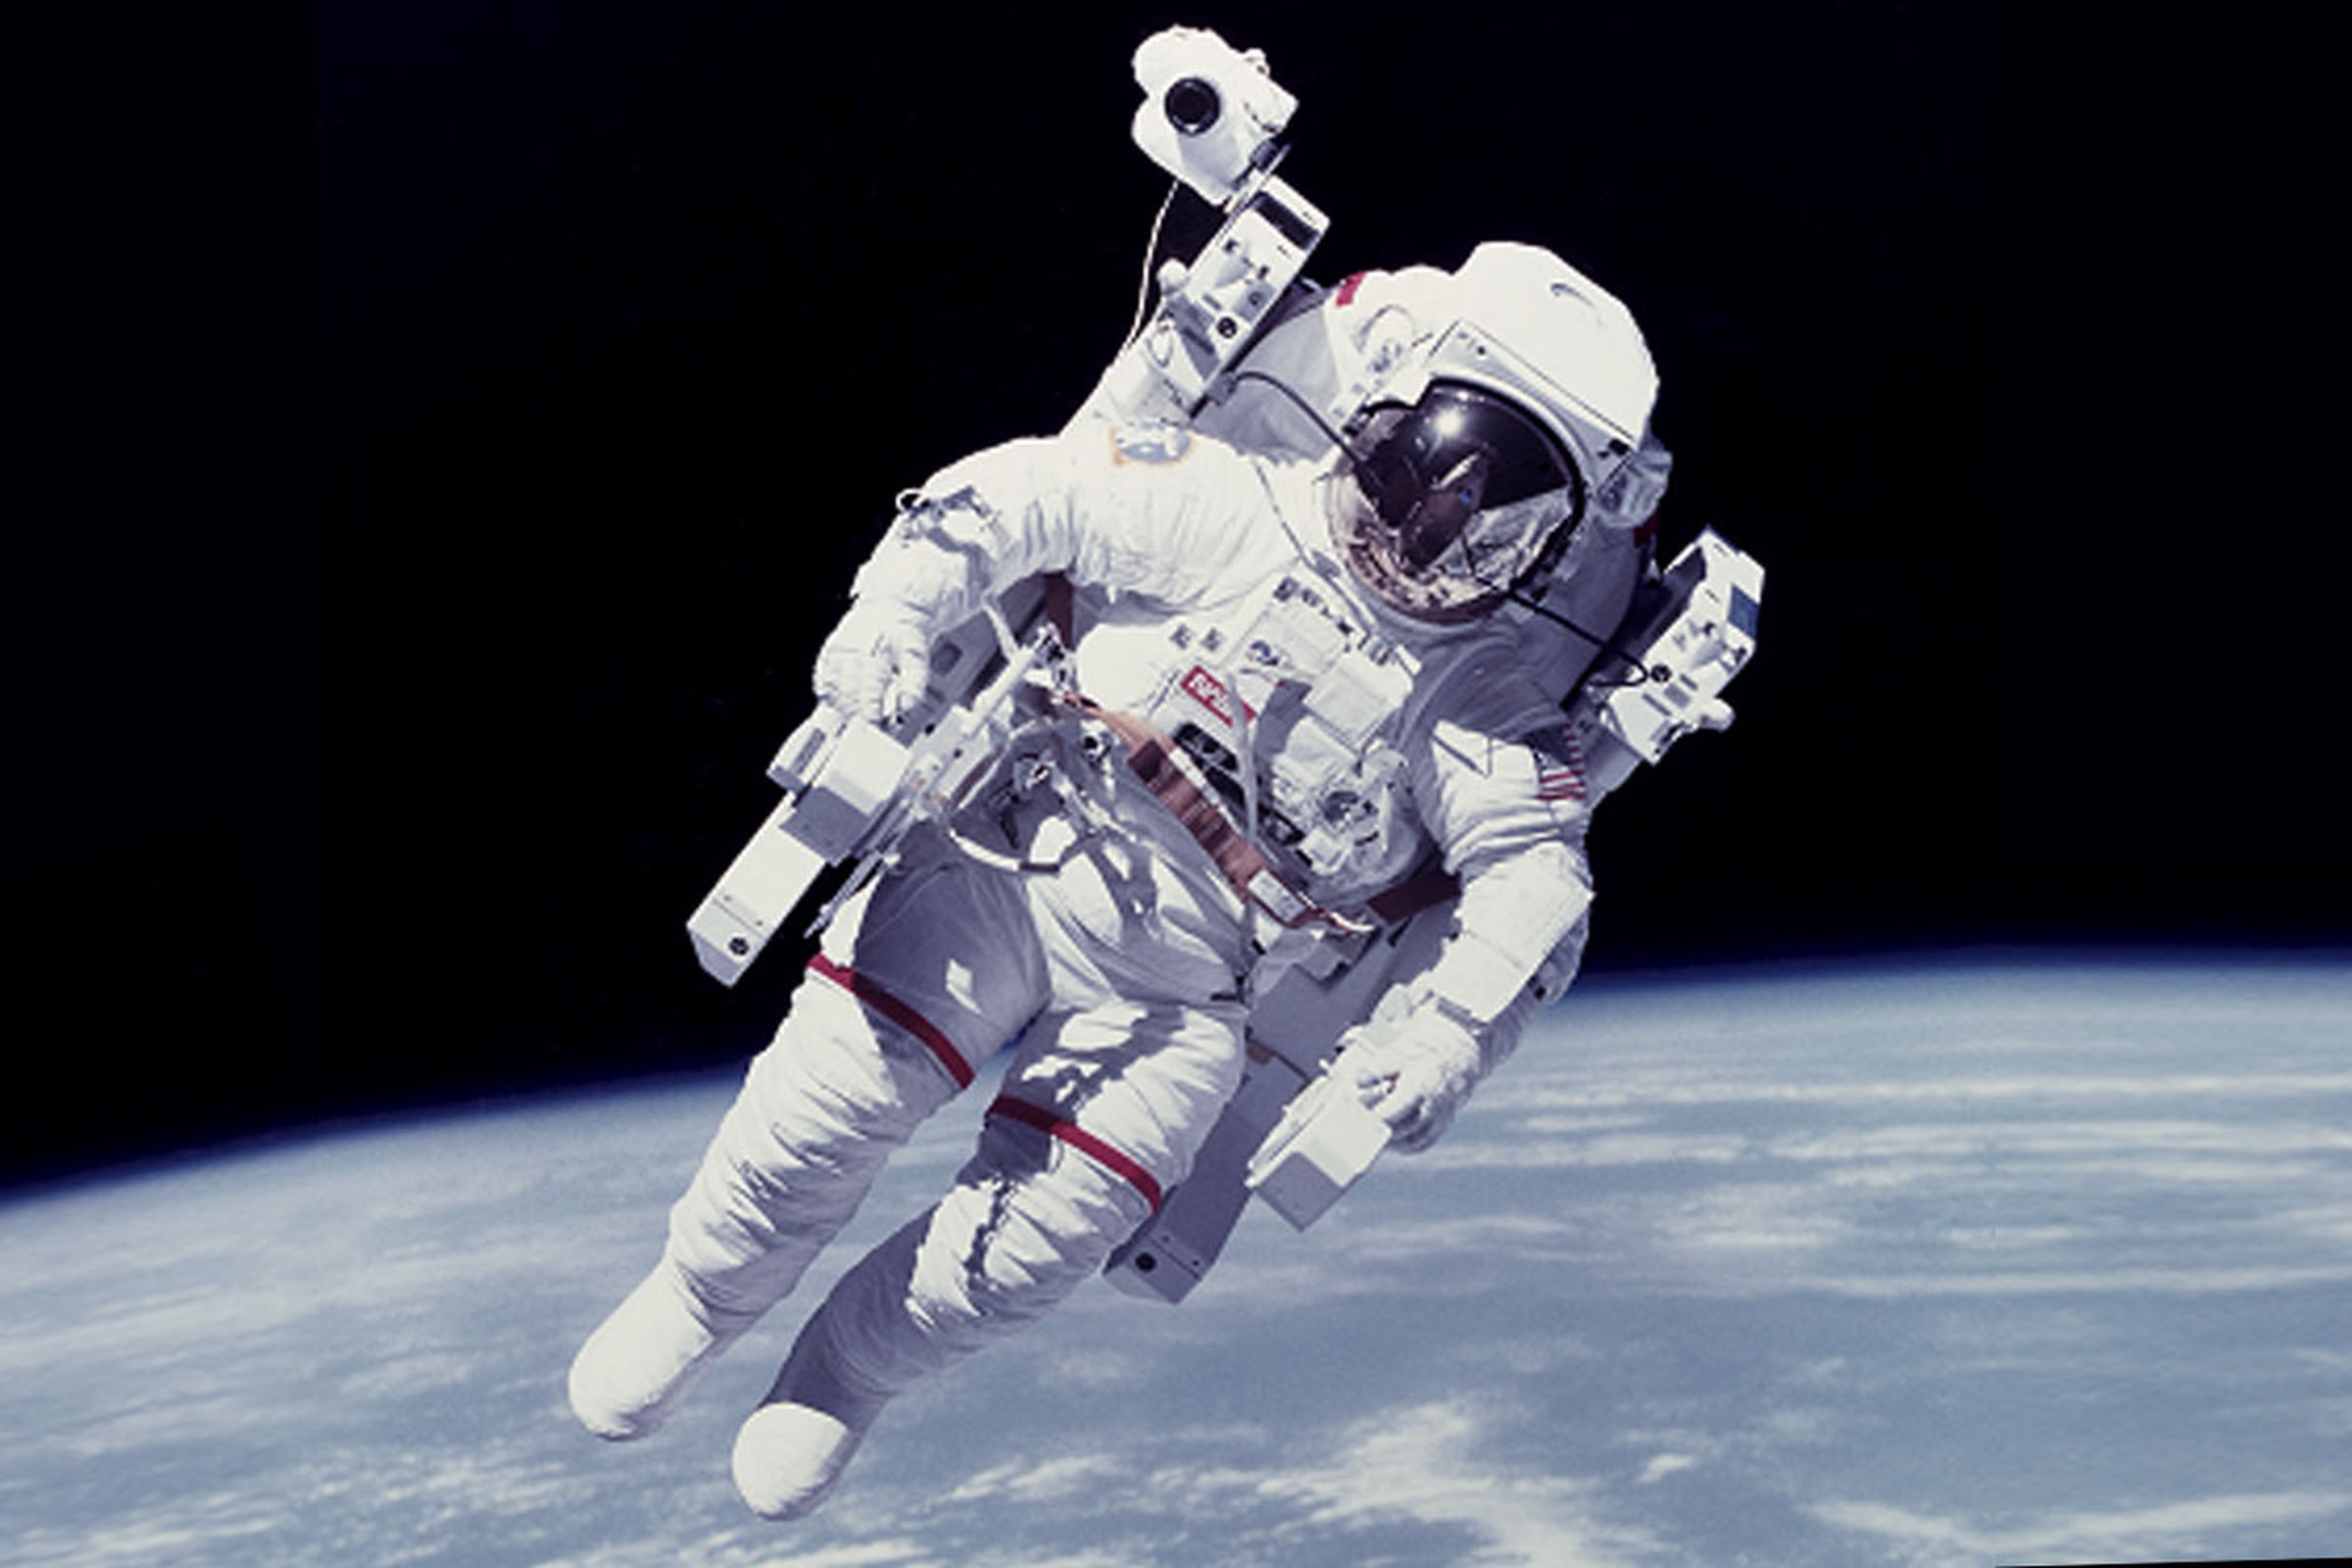 A NASA astronaut testing out a propulsion unit during an untethered spacewalk